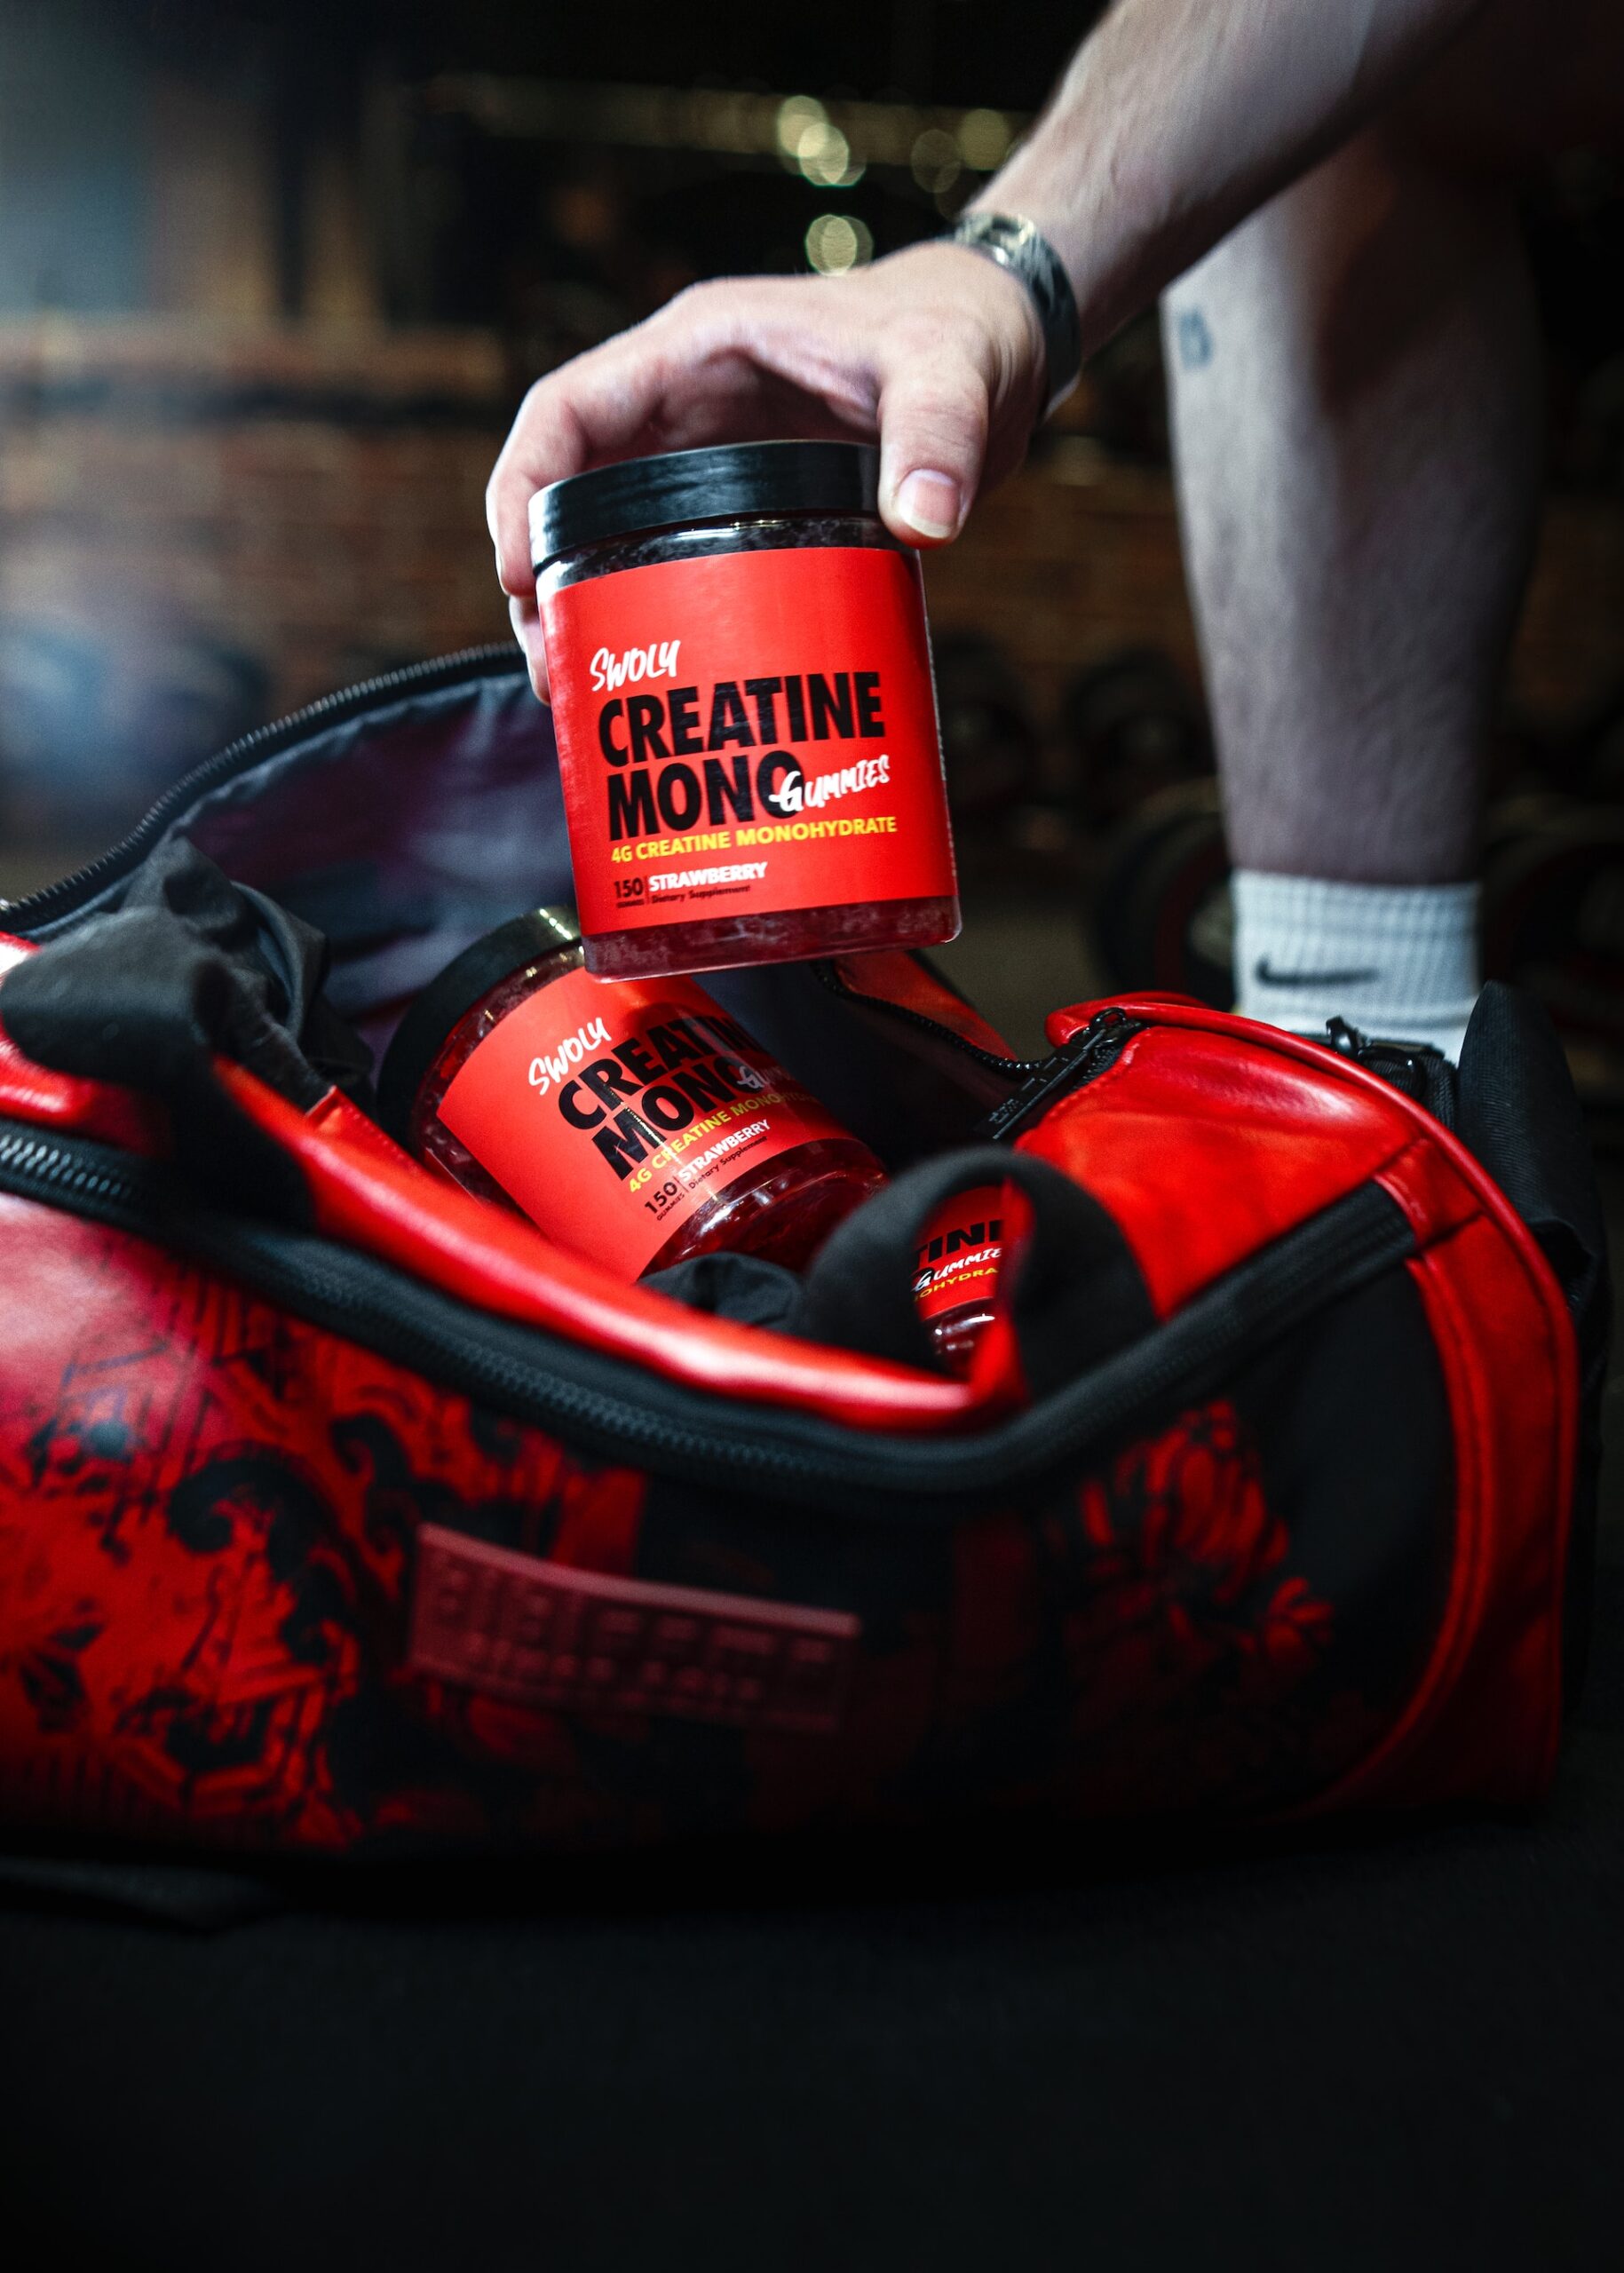 How to use Creatine for maximum effect